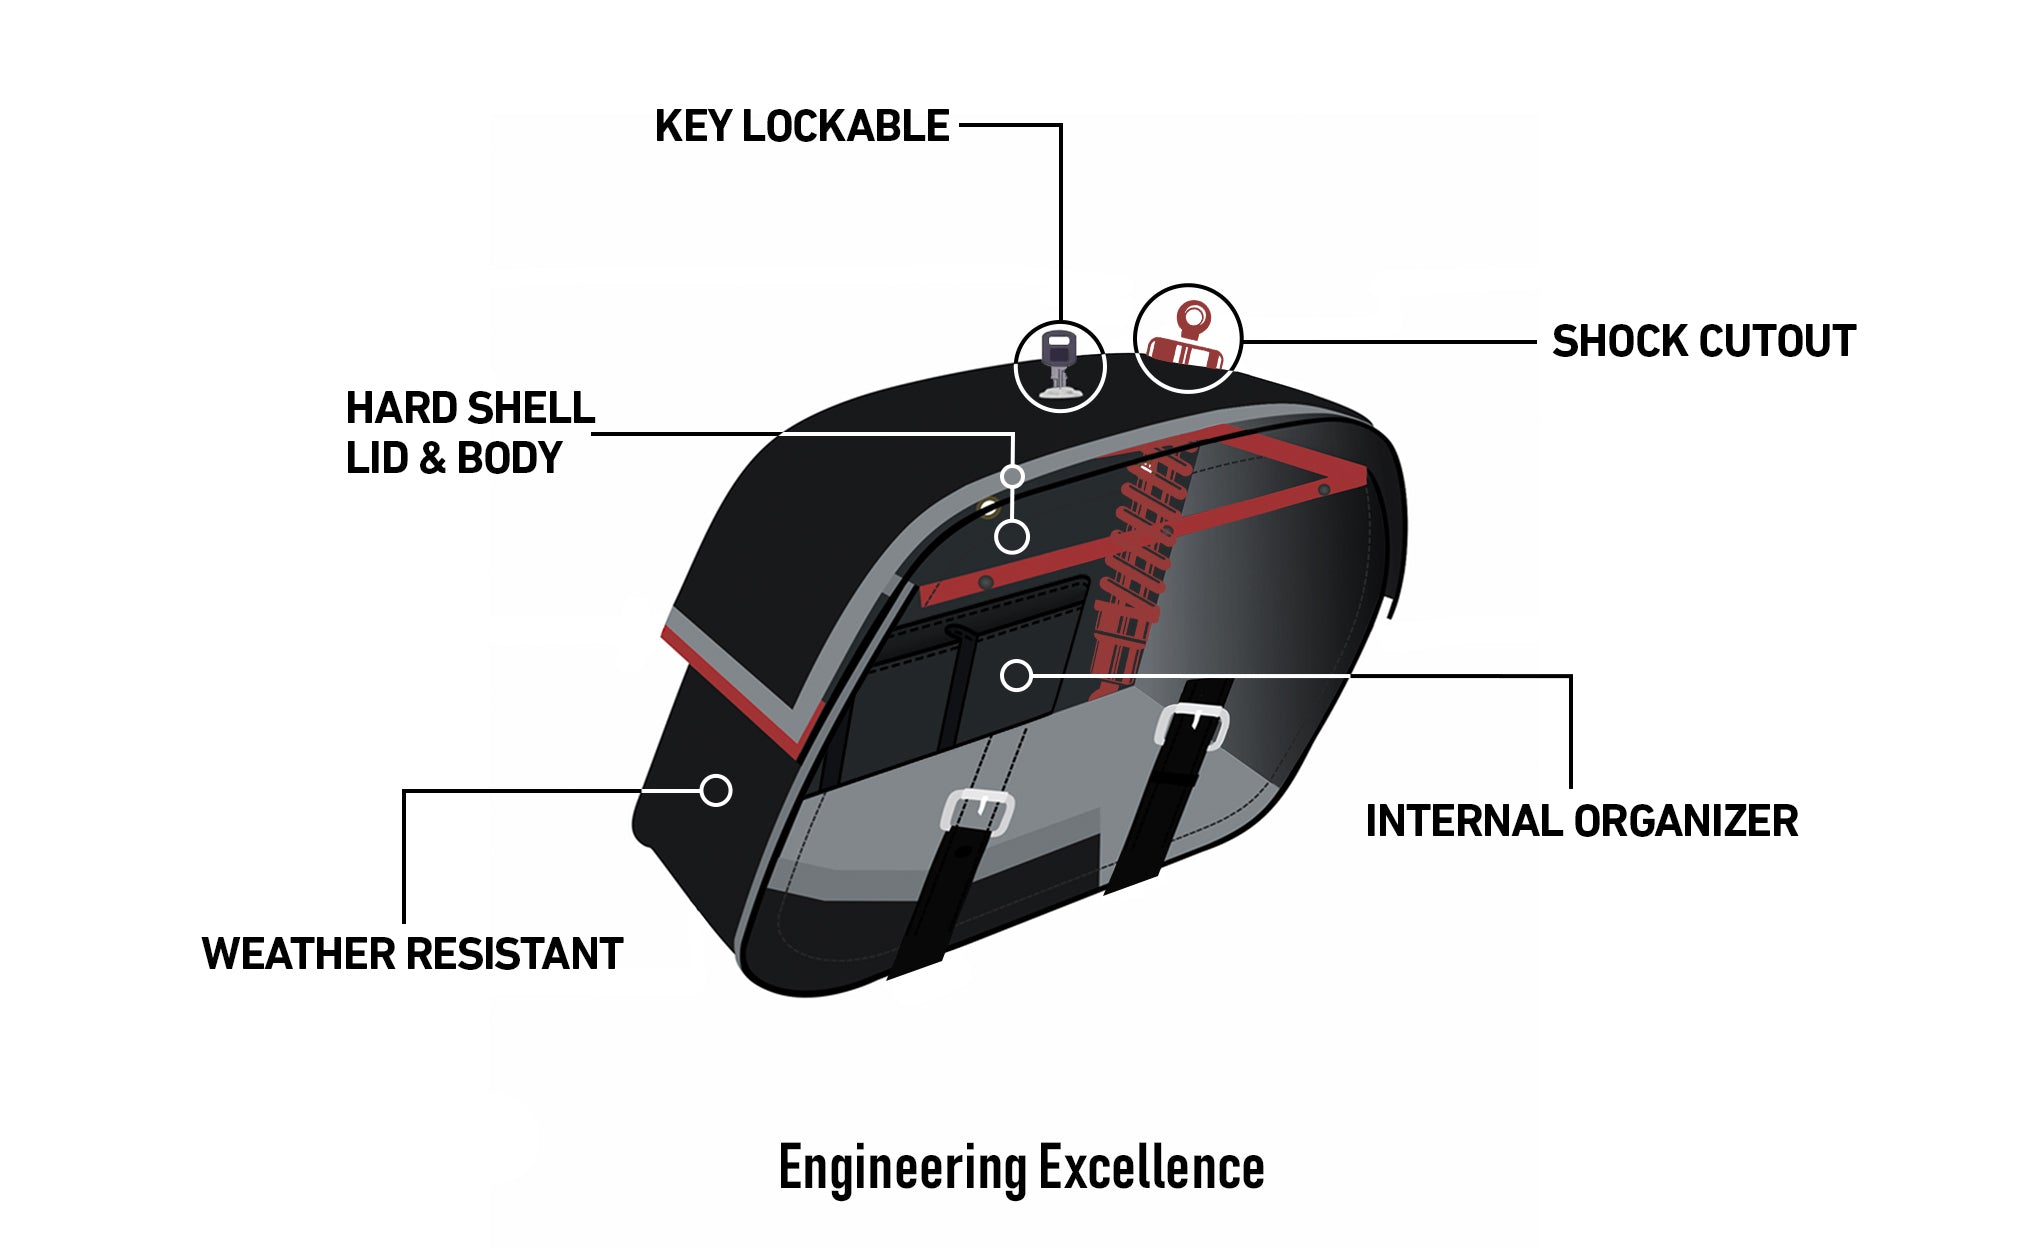 Viking Raven Extra Large Kawasaki Eliminator 125 Bn125 Shock Cut Out Leather Motorcycle Saddlebags Engineering Excellence with Bag on Bike @expand